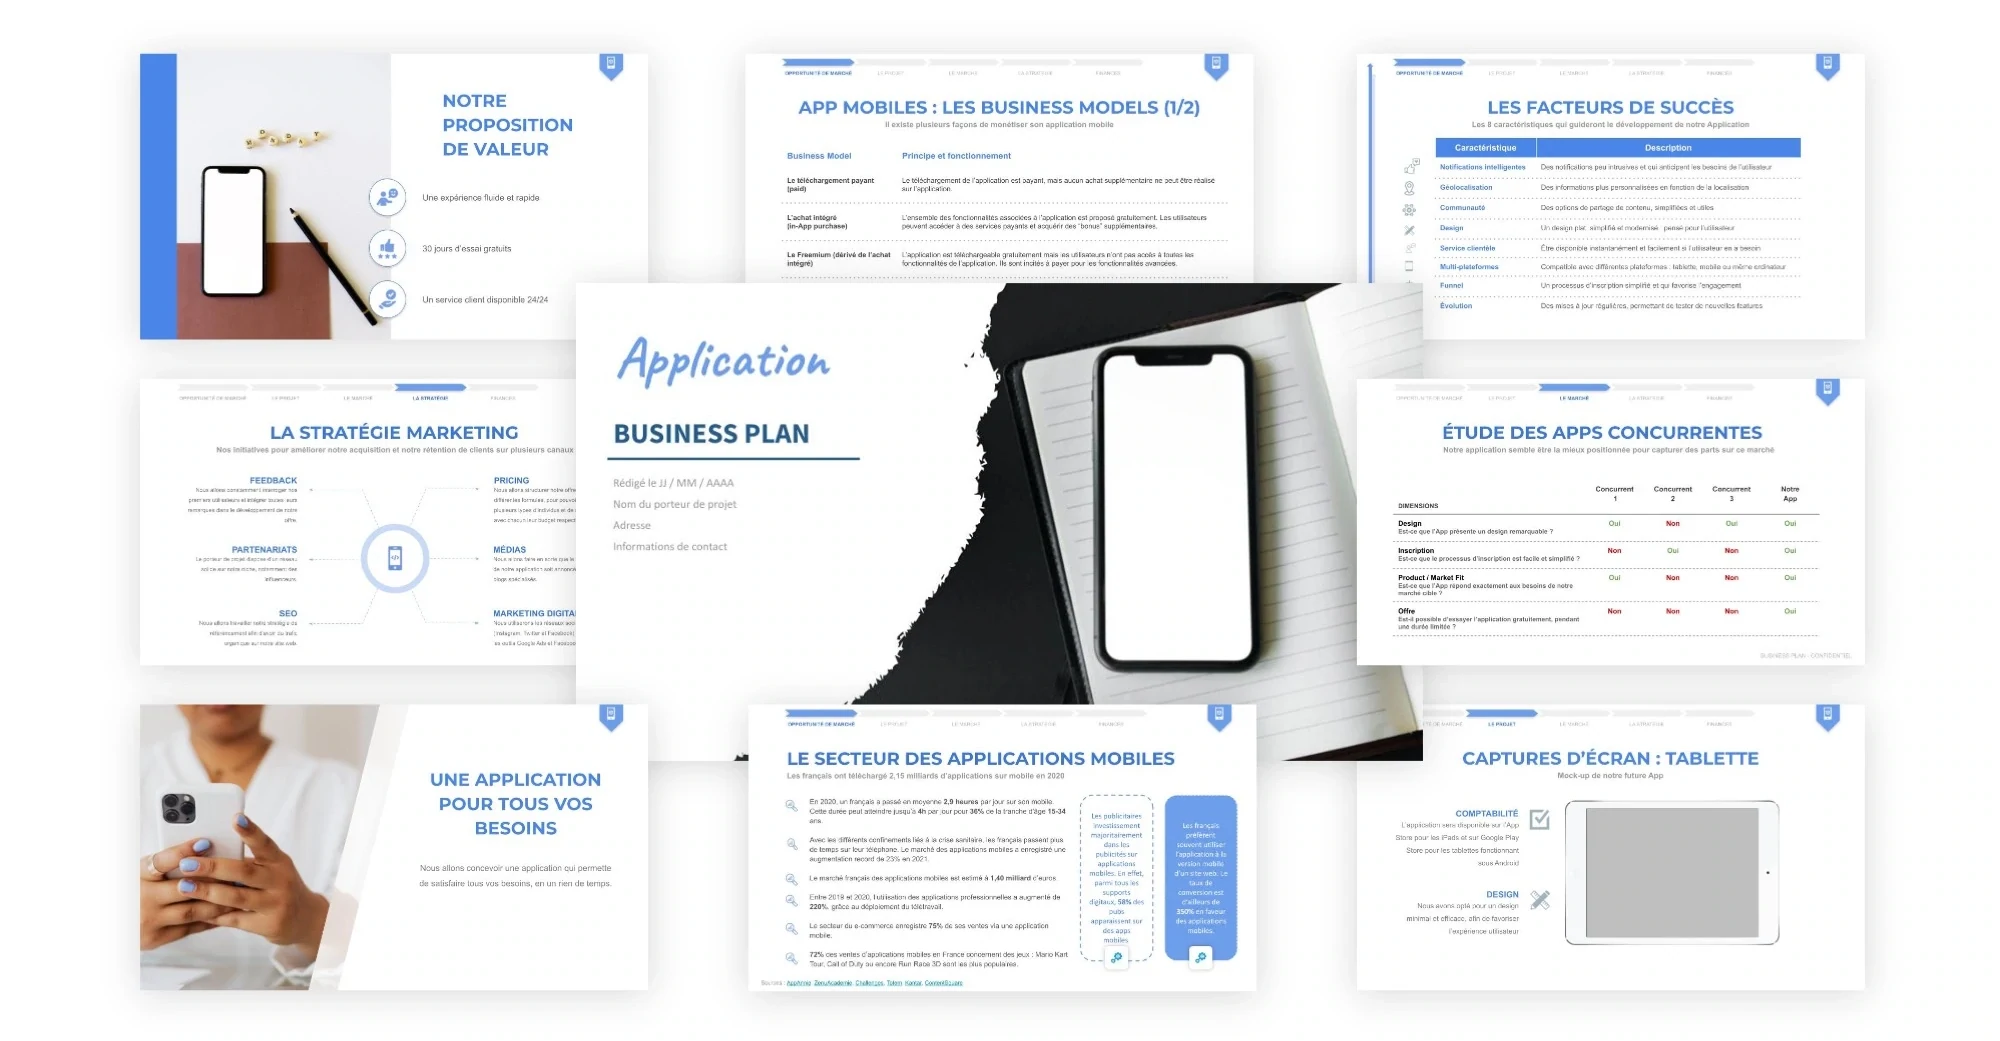 exemple business plan application mobile